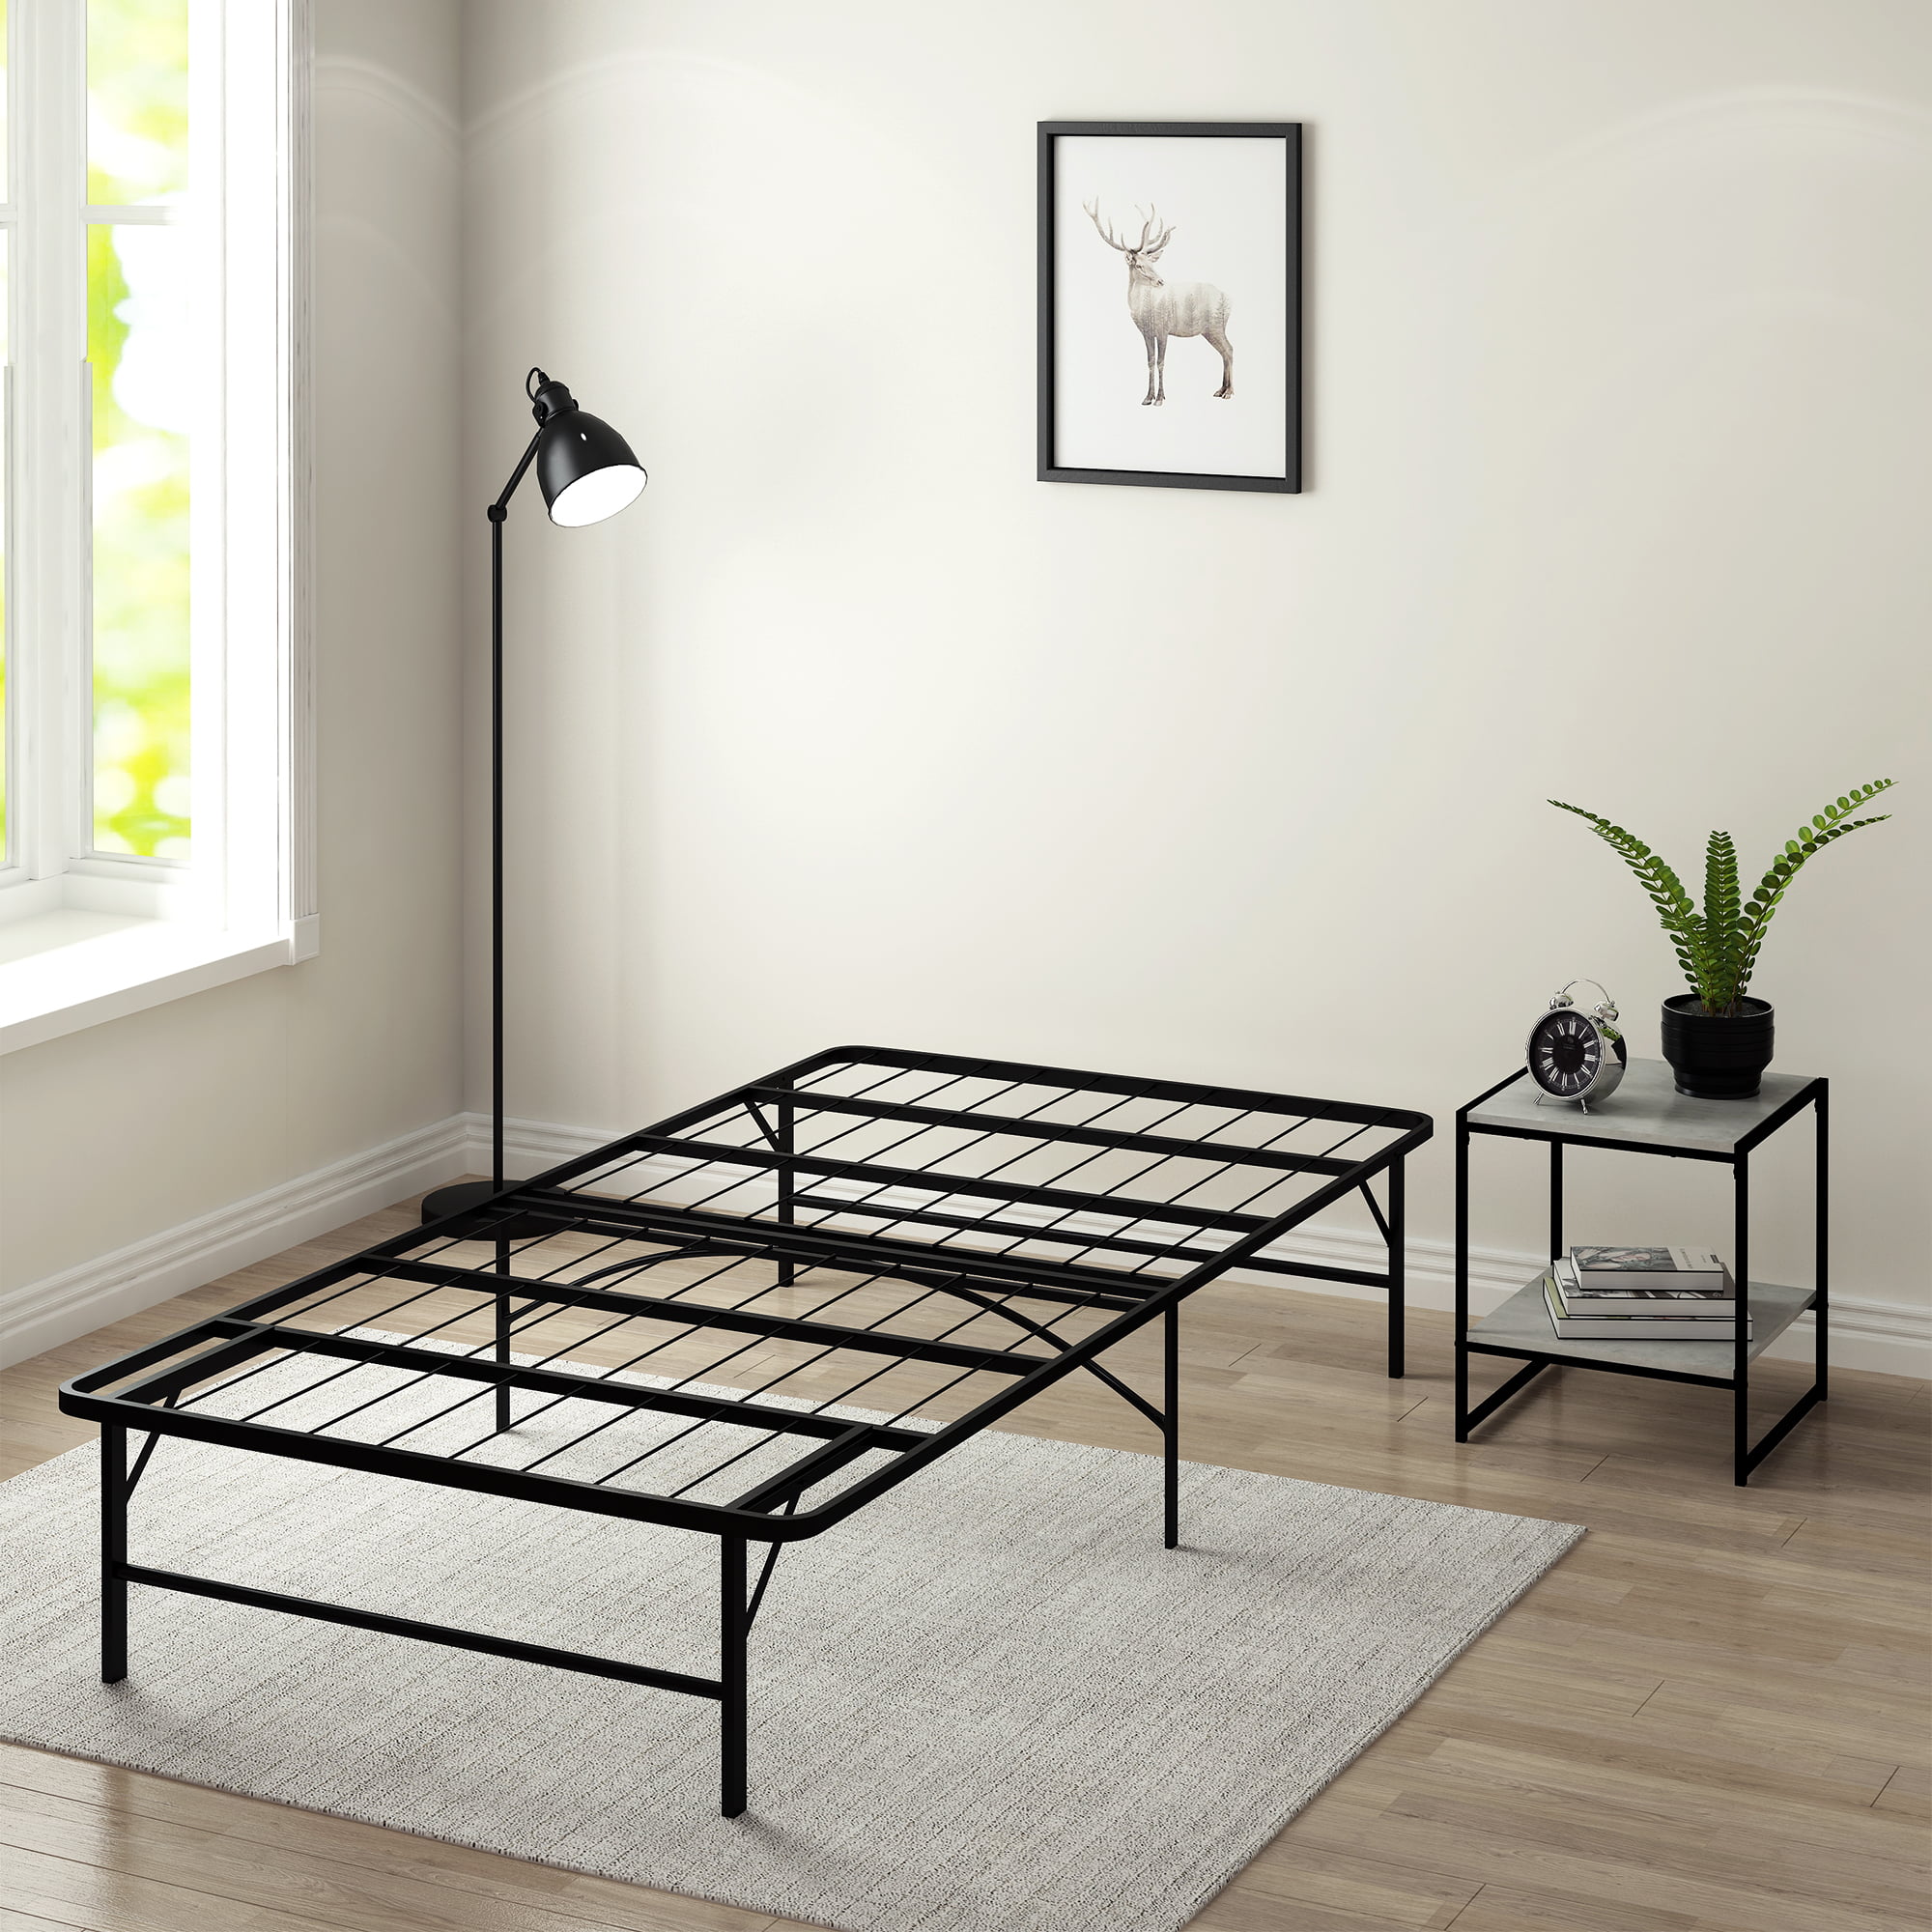 Furinno Angeland Mattress Foundation, Twin Bed With Frame And Mattress